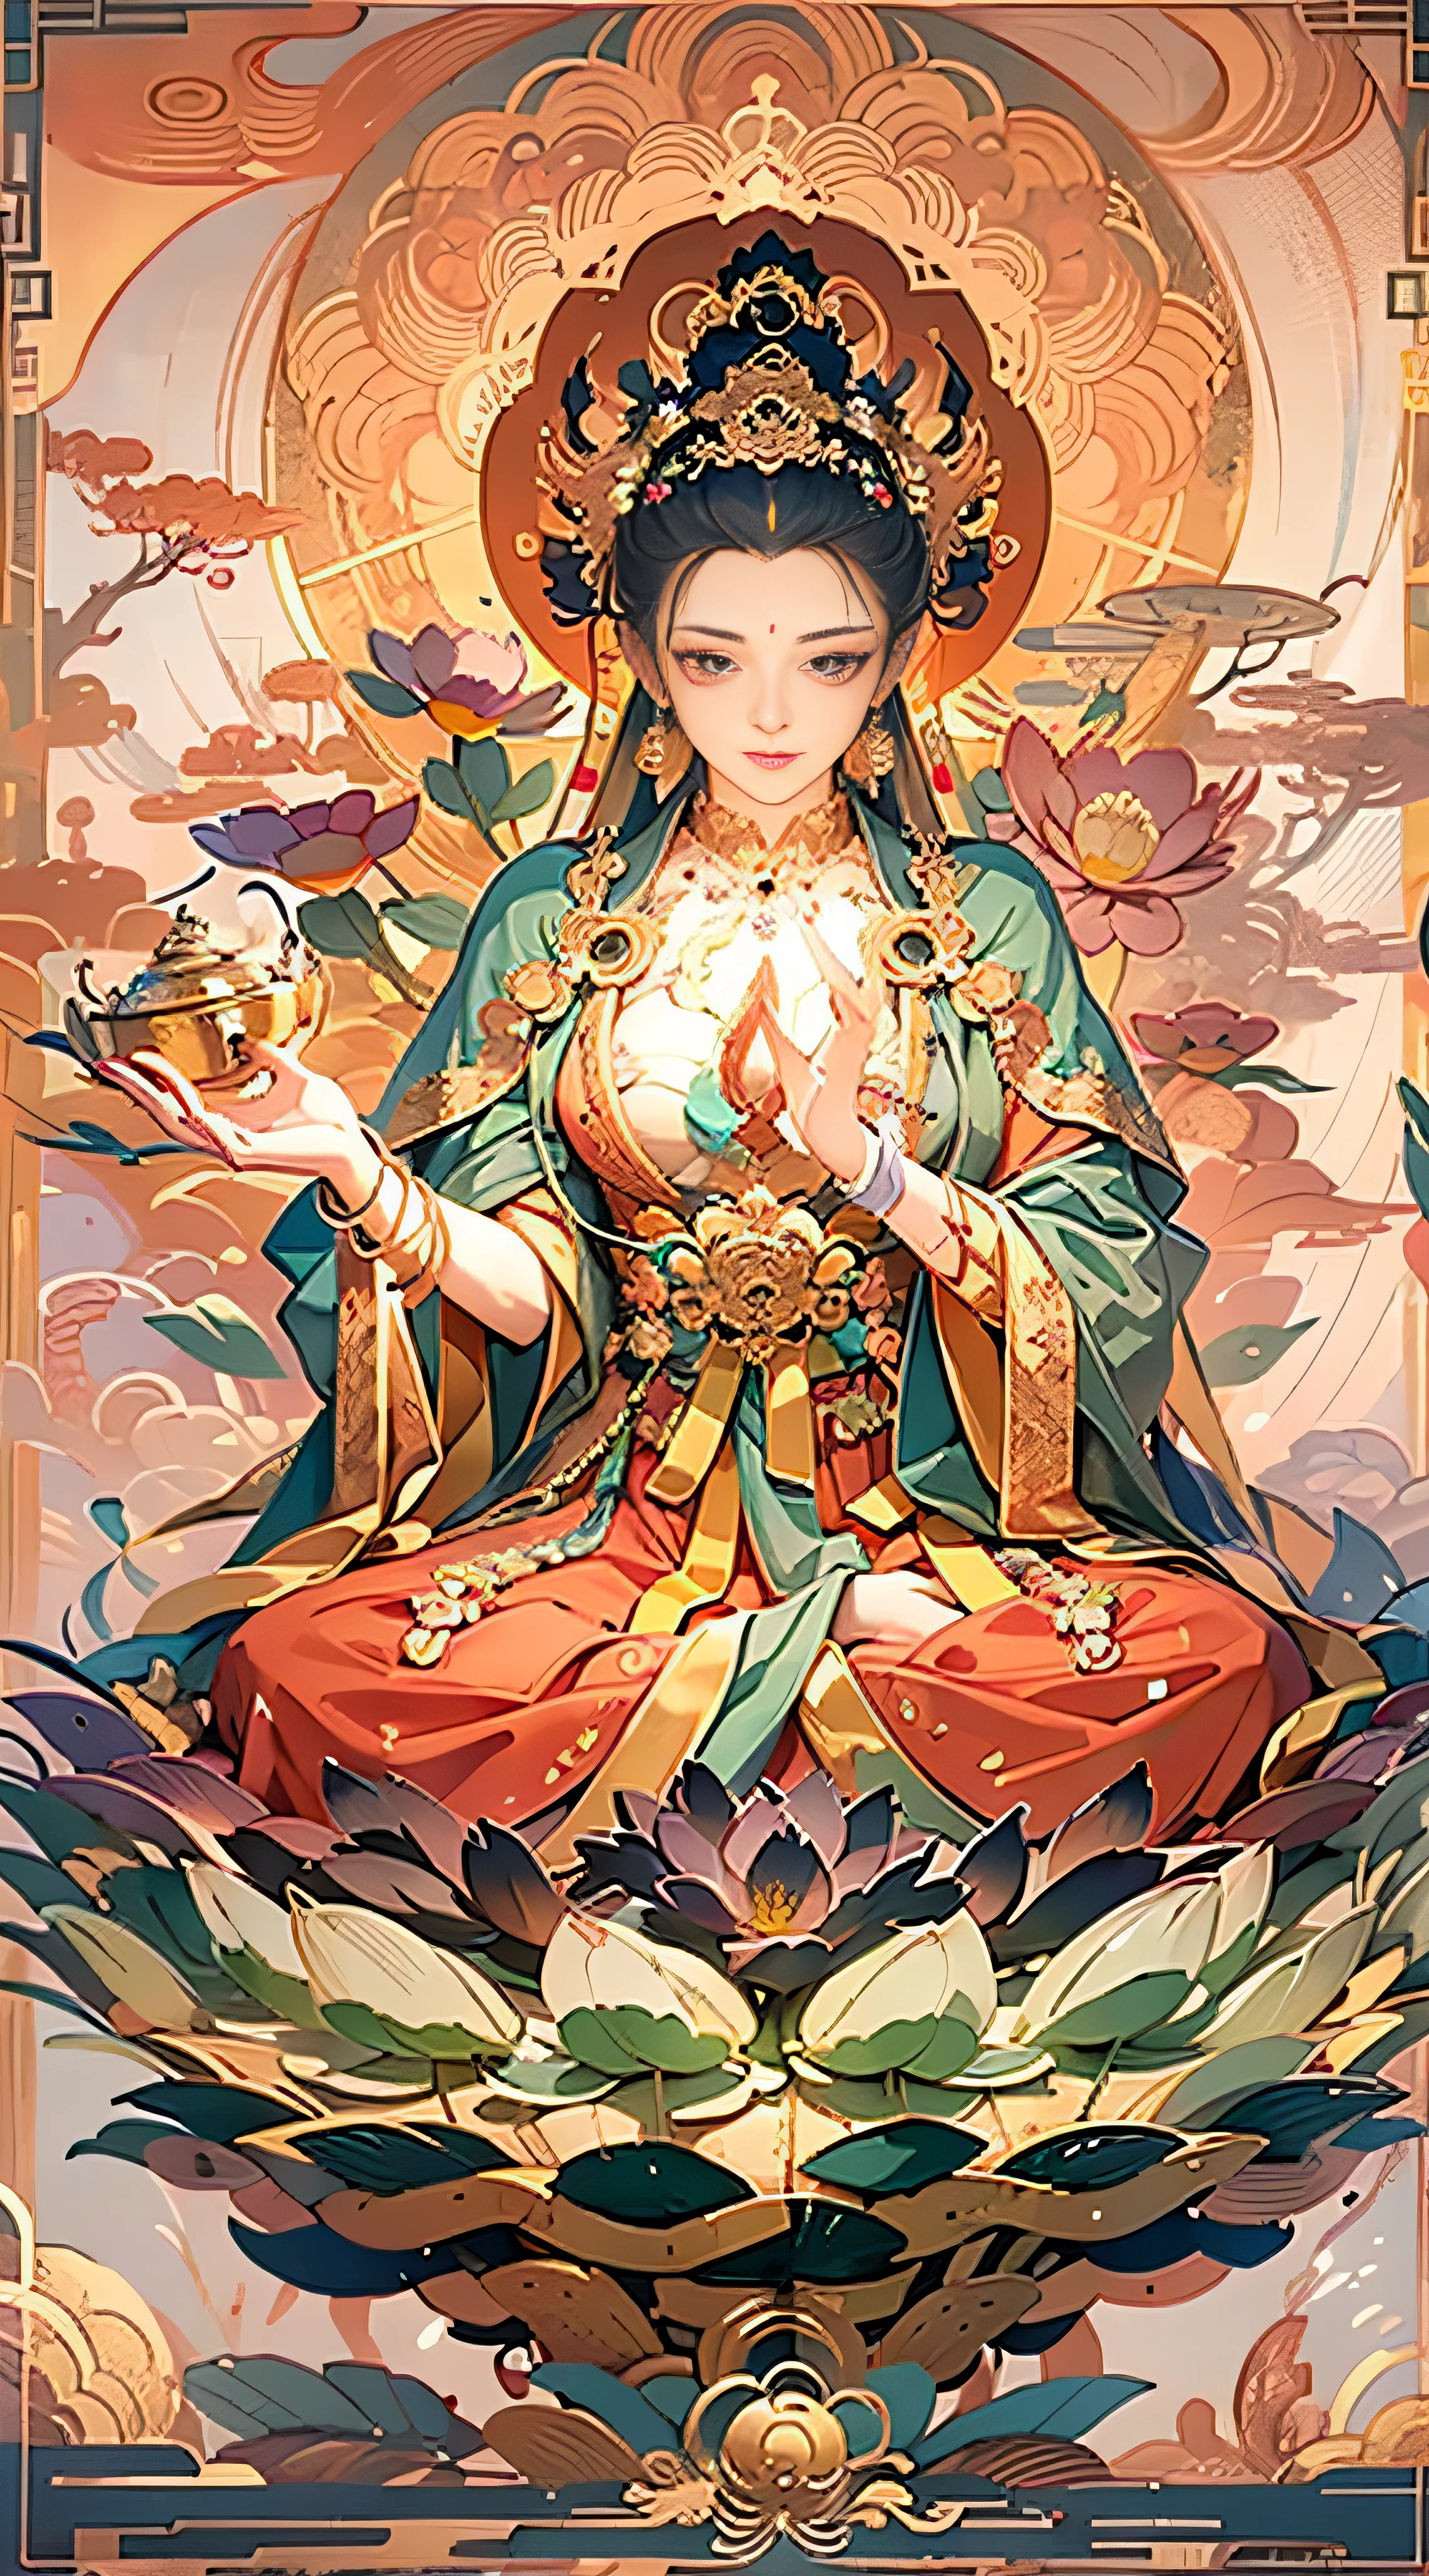 （Chinese immortals）, （Buddhism）, Multip_Handythological stories）, （bodhisattva）, She sits on a lotus, （Three hands on the left，Three hands on the right, Each hand holds a different Buddhist vessel, left right symmetry），（Delicate and beautiful face）, （White silk robe）sitting on a lotus flower, Frontal photo，Light smile, neo-classical, OP Art, Chiaroscuro, Cinematic lighting, god light, Ray tracing, character sheets, projected inset, first person perspective, hyper HD, Masterpiece, ccurate, Textured skin, Super detail, High details, High quality, Award-Awarded, Best quality, A high resolution, 8K